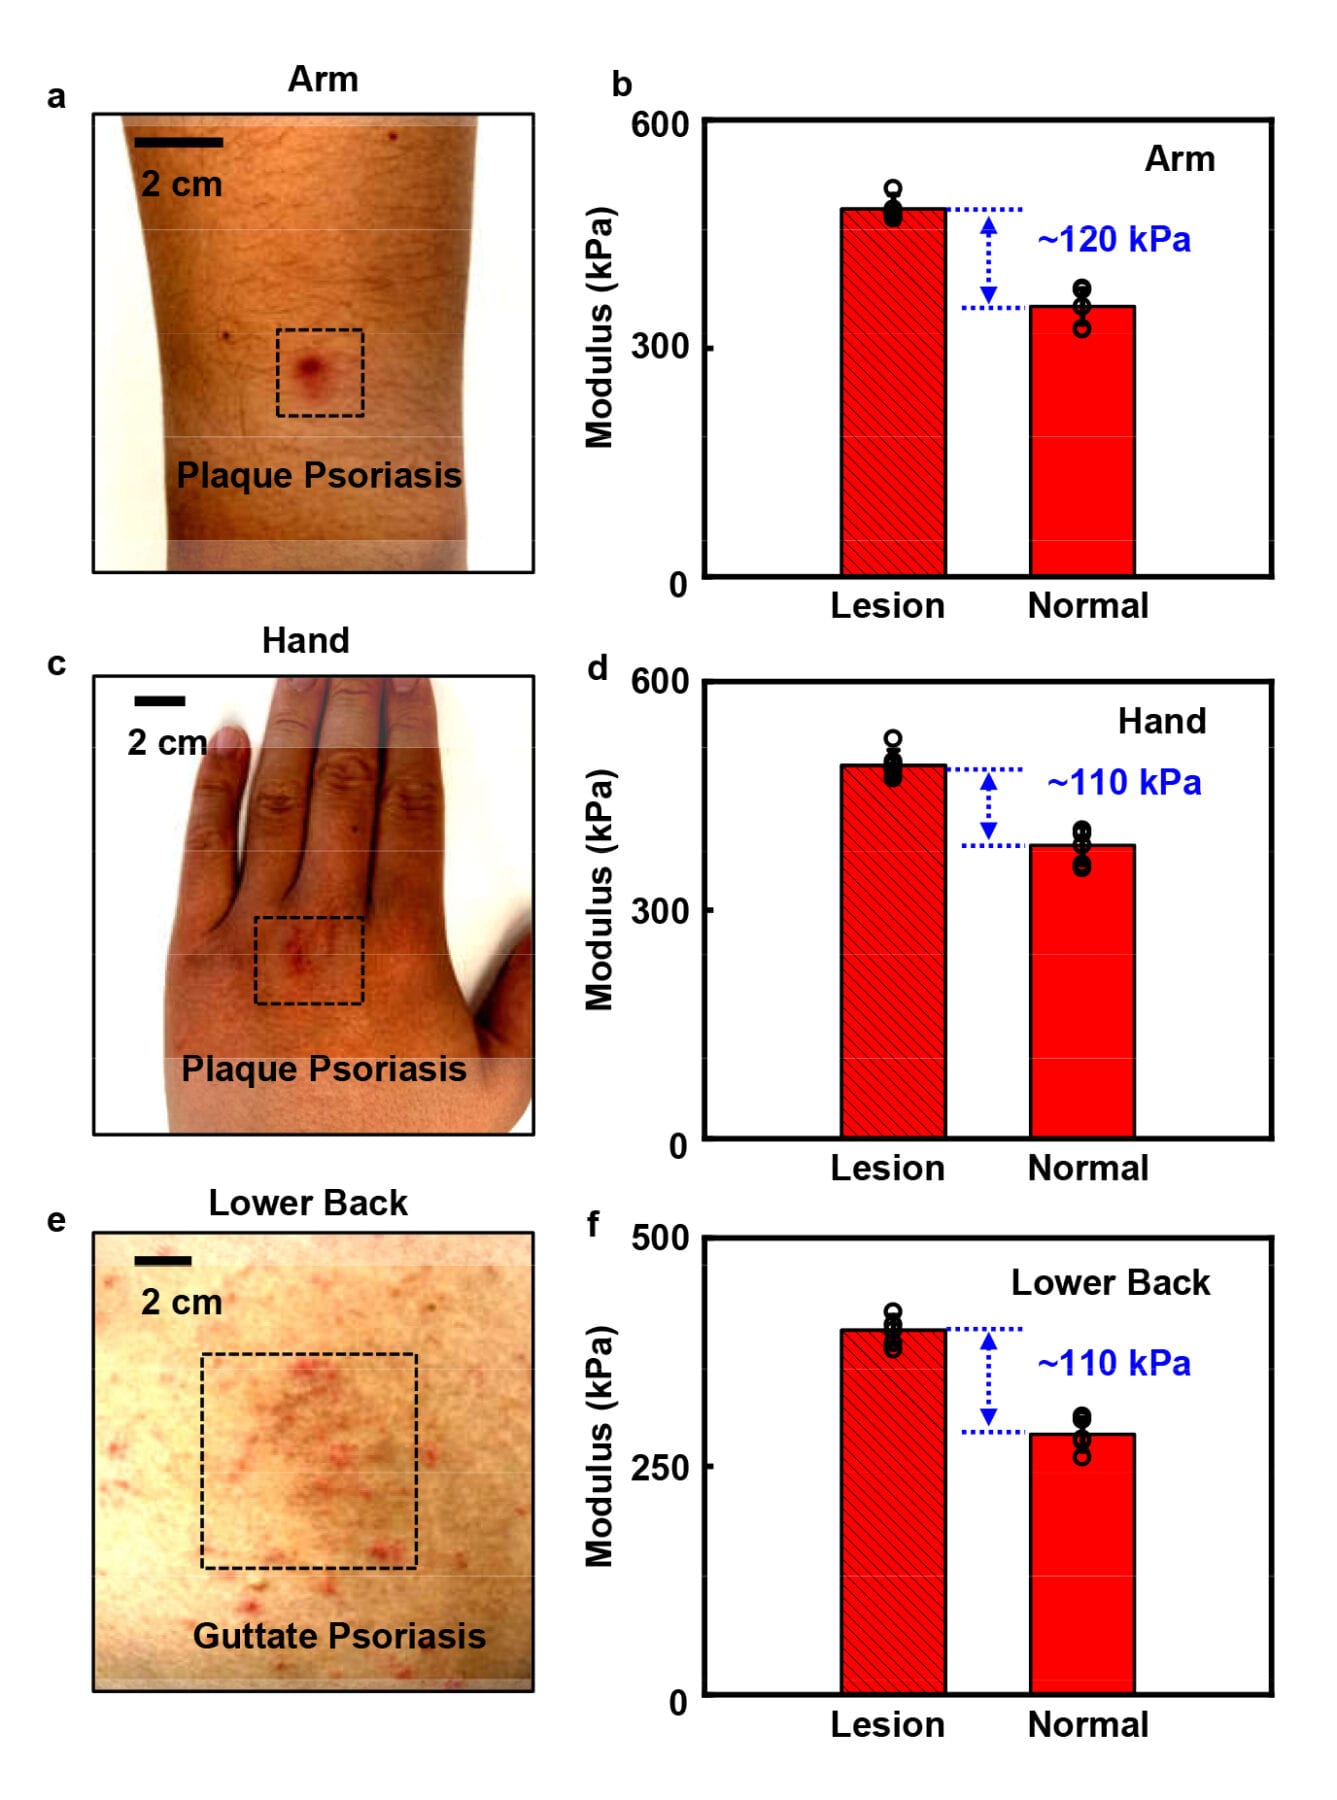 The team applies the device on the skin lesions associated with psoriasis on the arm (a), hand (c), lower back (e) and the unaffected skin. Figure b, d and f show the results of stiffness variations between unaffected skin and lesion regions. (Photo source: Song, E., Xie, Z., Bai, W. et al. / DOI number: 10.1038/s41551-021-00723-y)